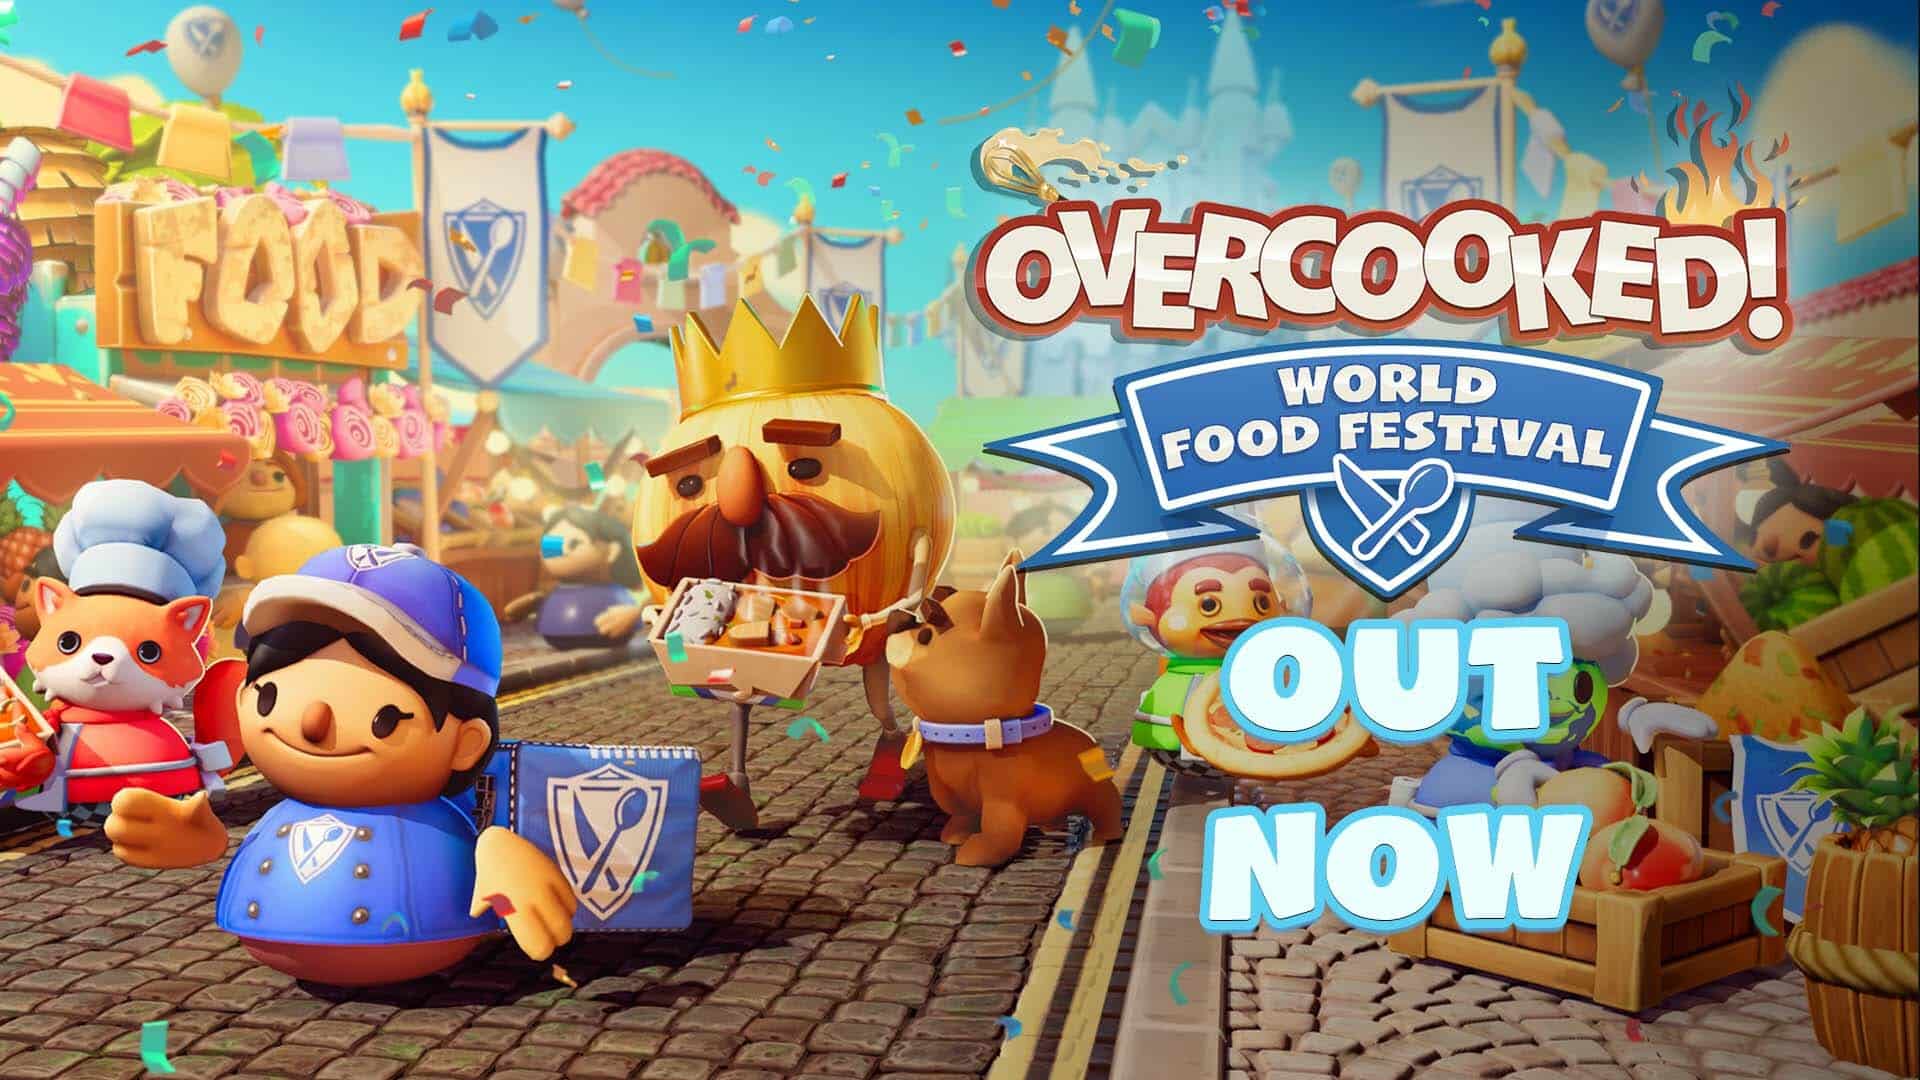 Overcooked: All You Can Eat Wallpapers